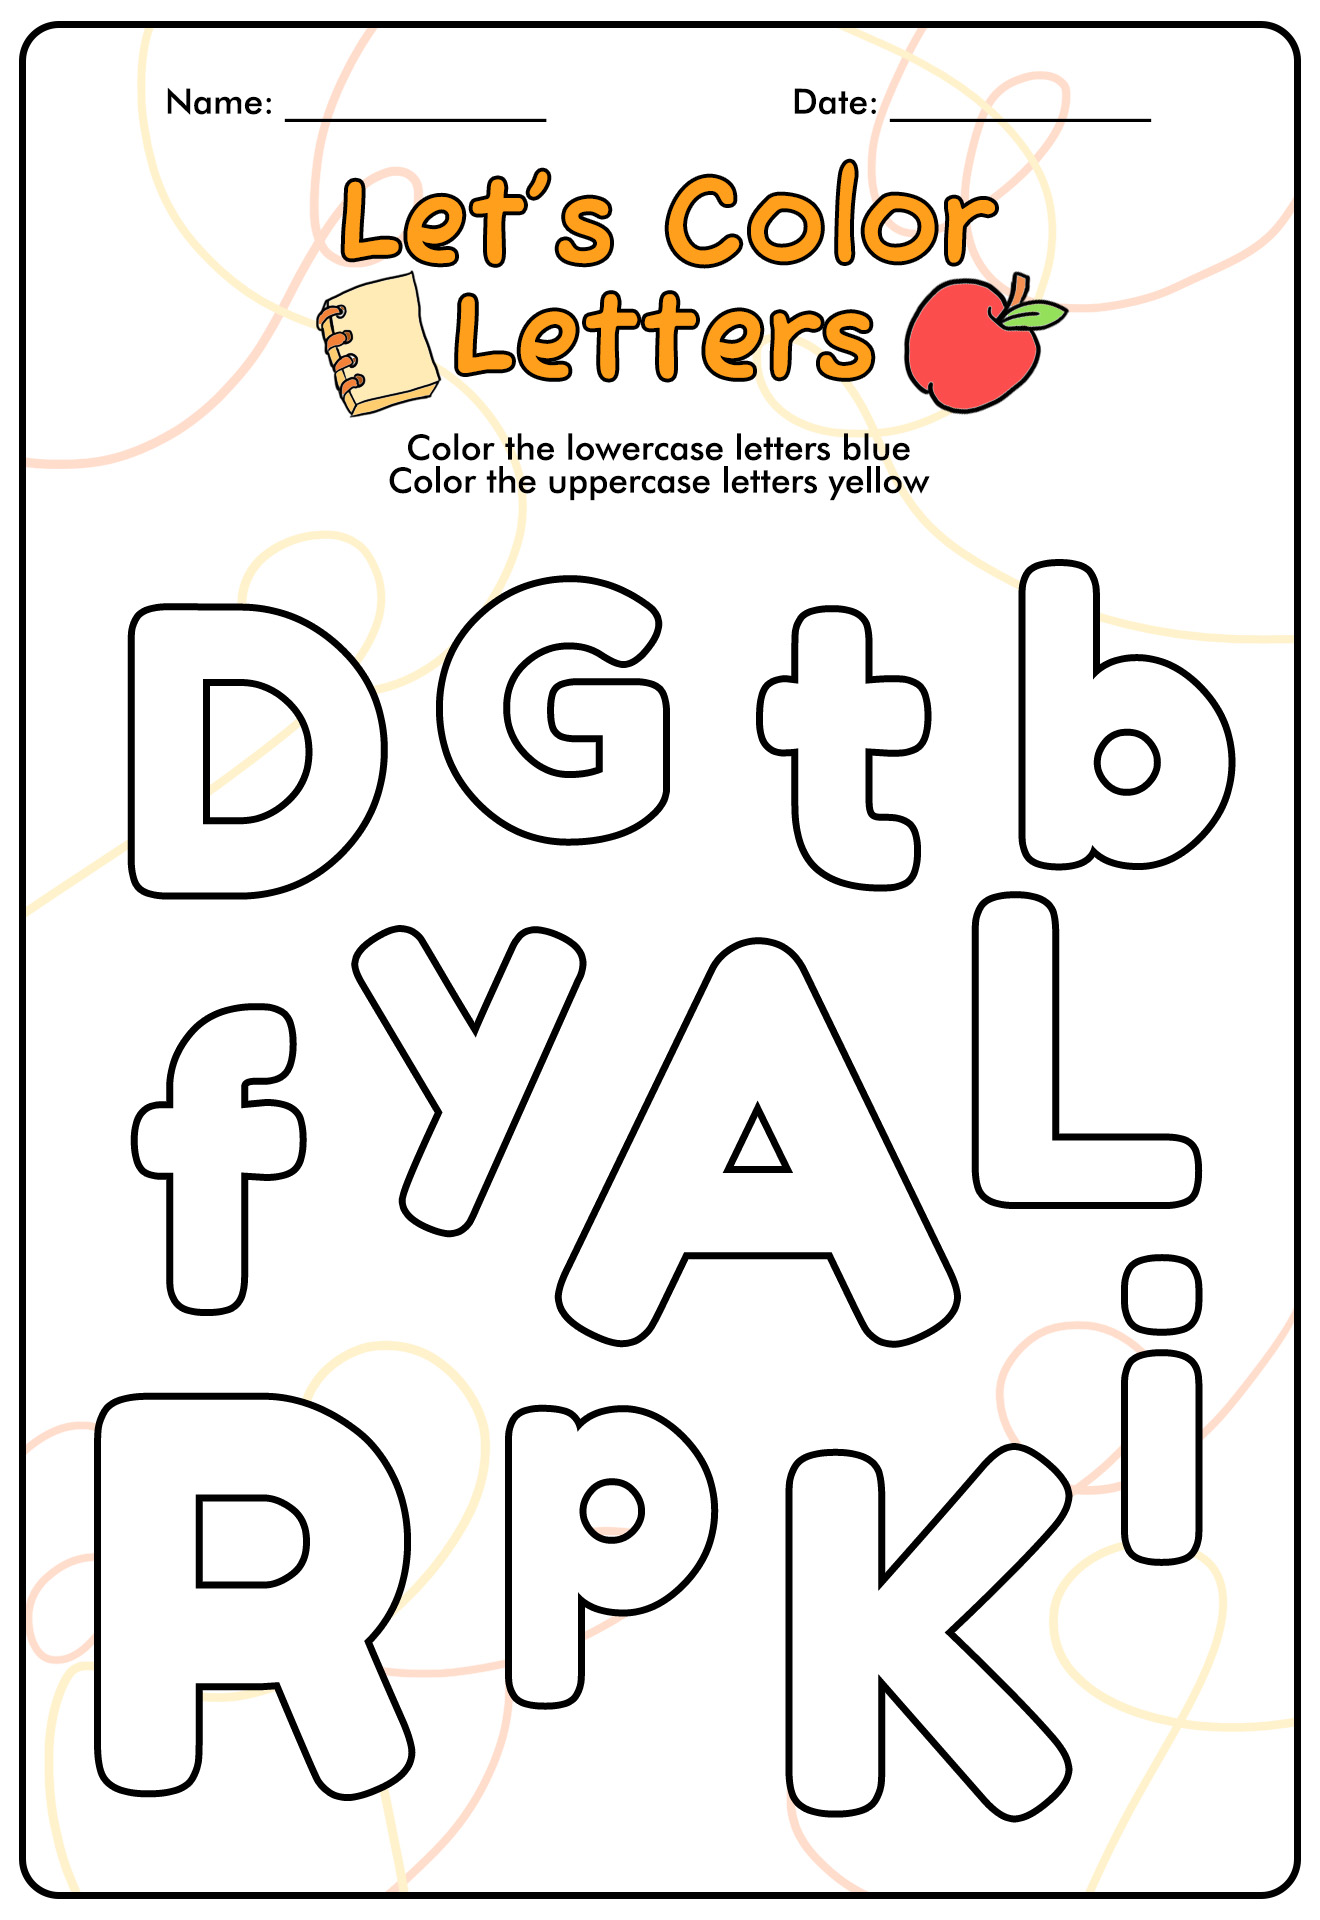 Printable Alphabet Lowercase Mixed Colors